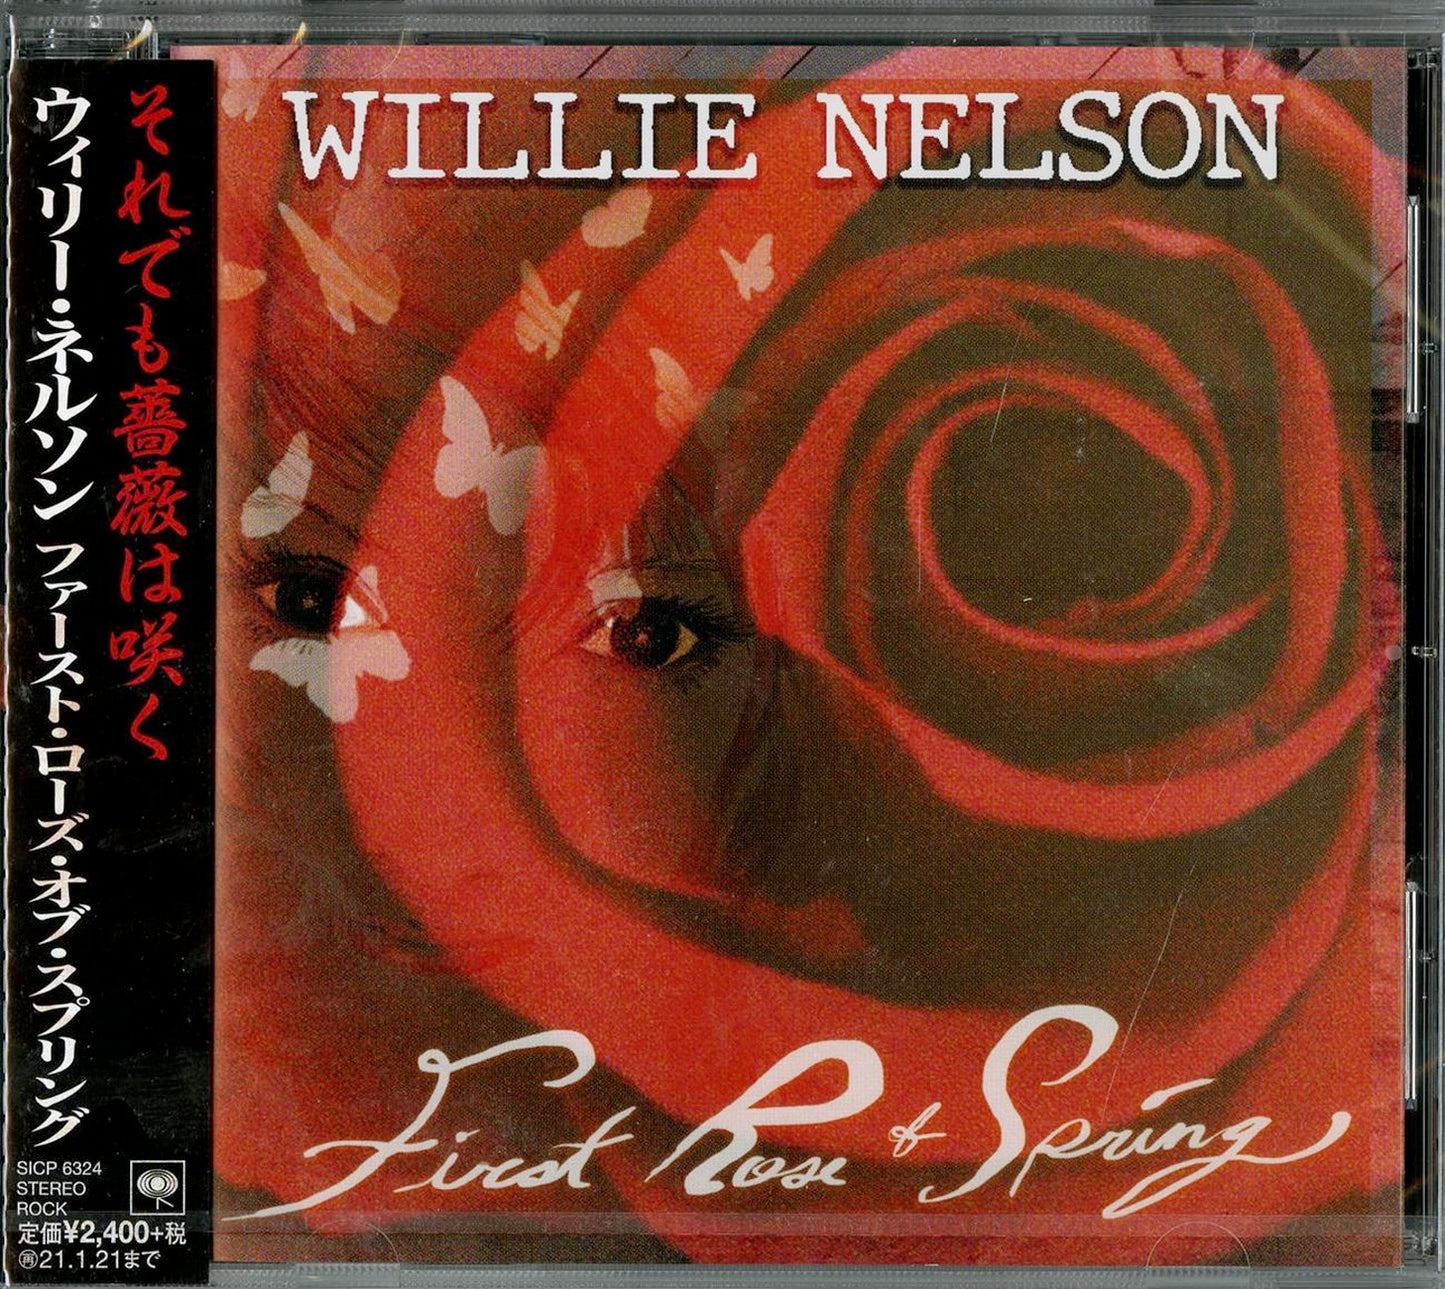 Willie Nelson - First Rose Of Spring - Japan CD